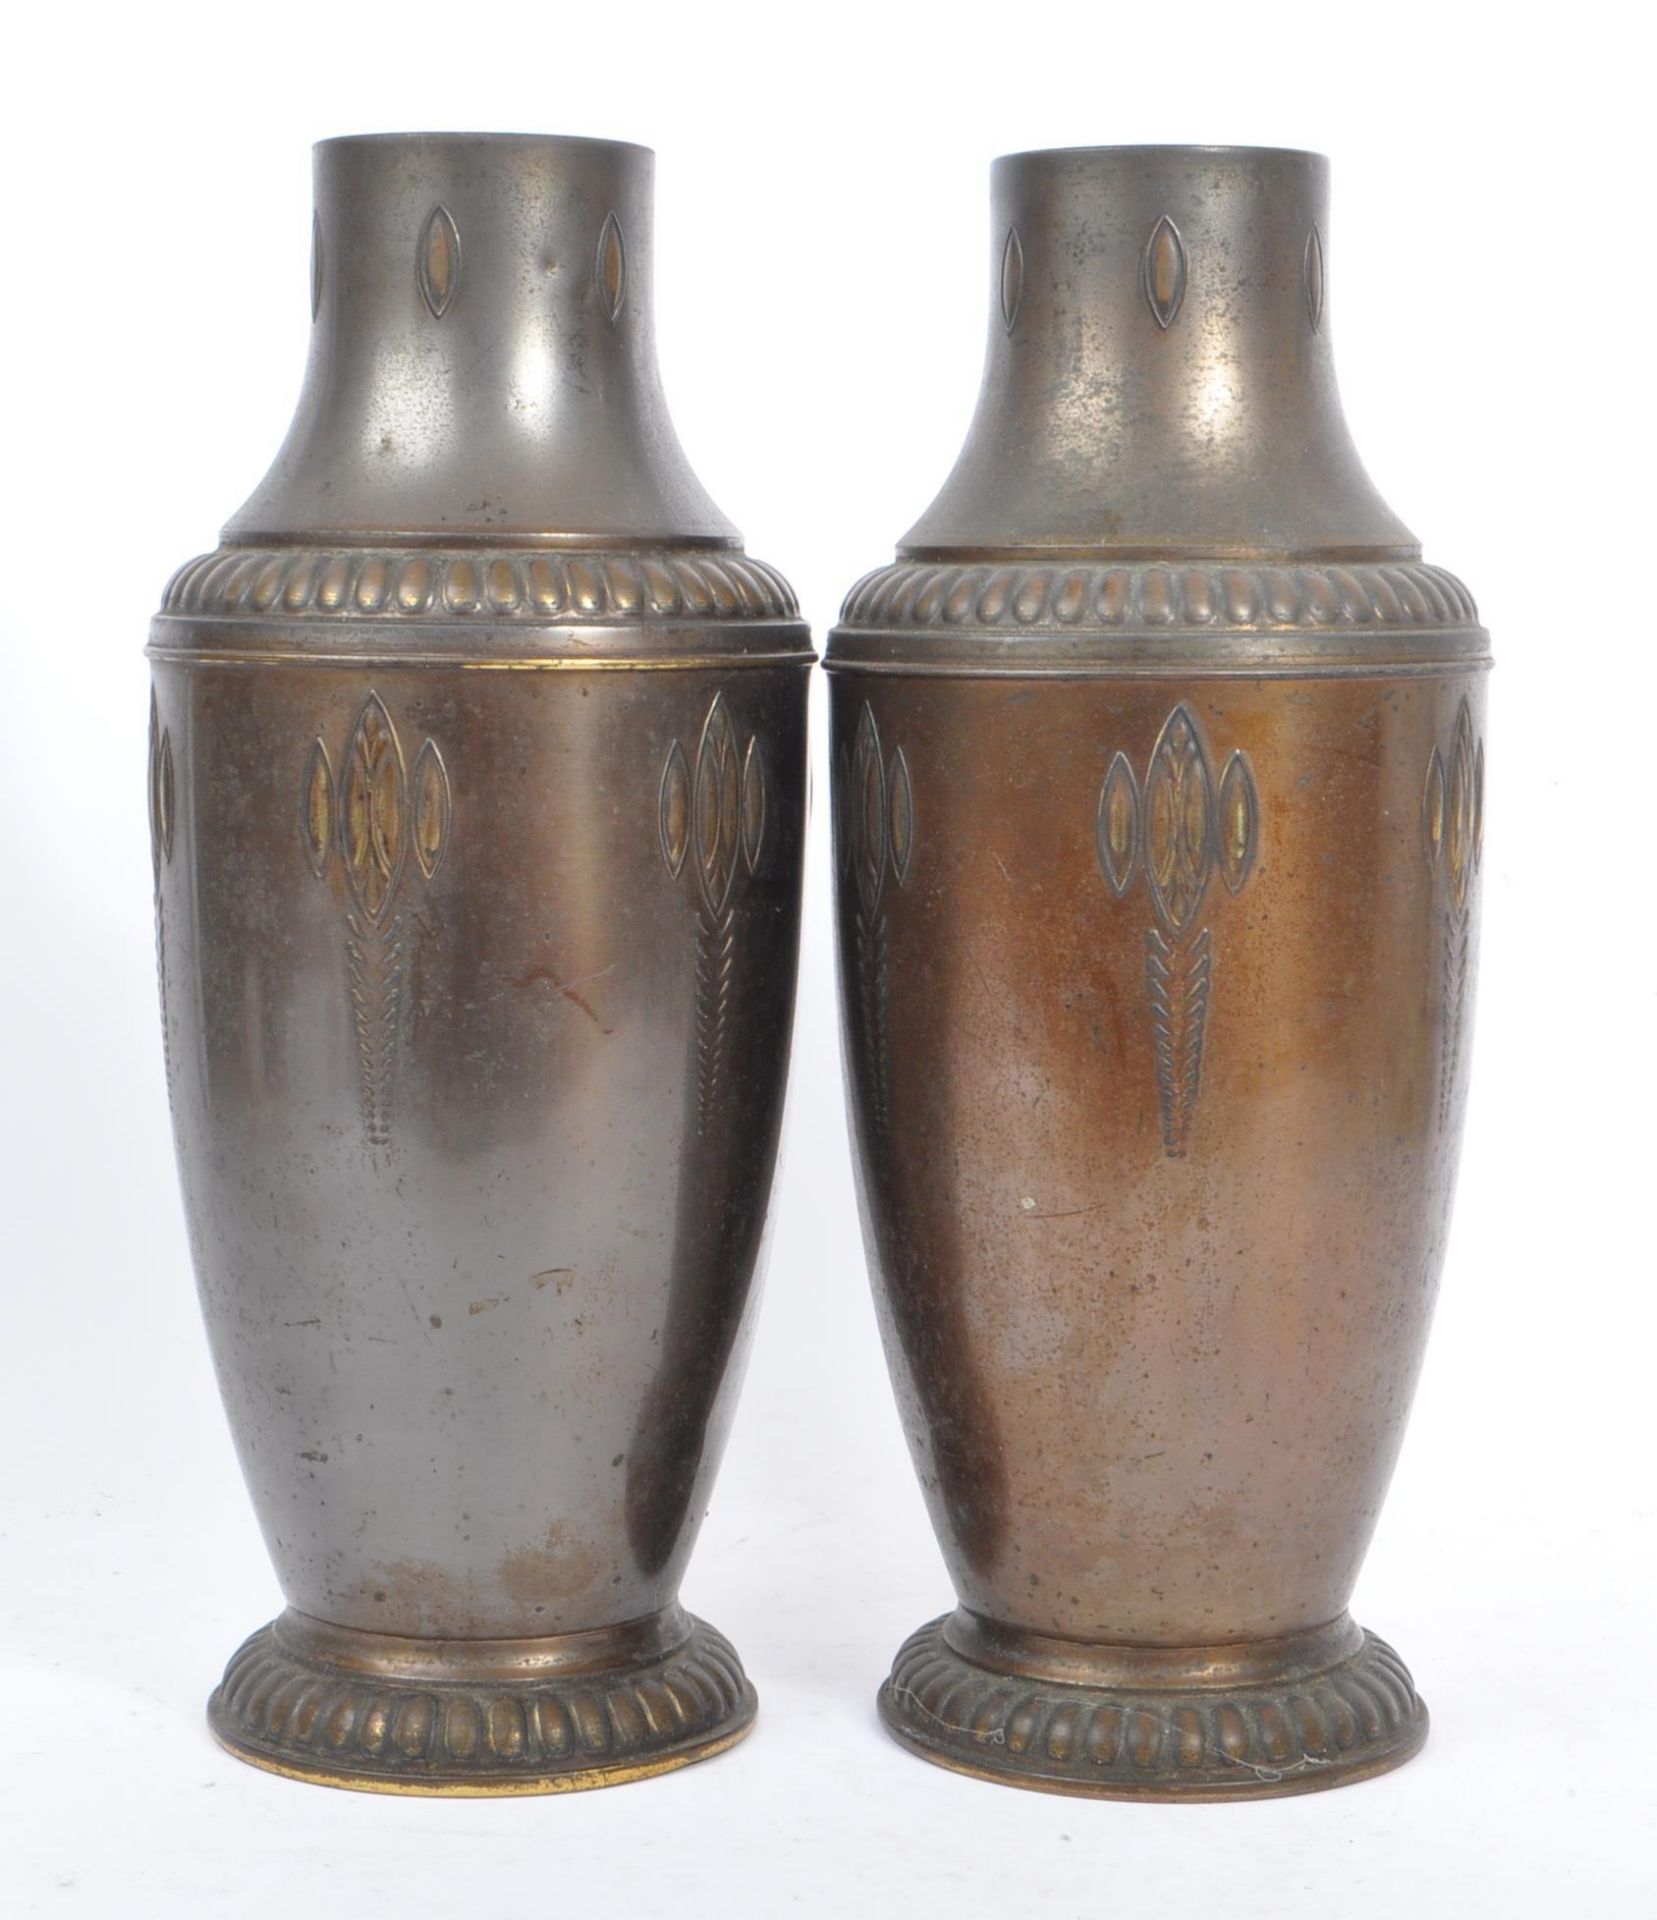 1920S PAIR OF BRASS ART NOUVEAU STYLE VASES BY DAALDEROP